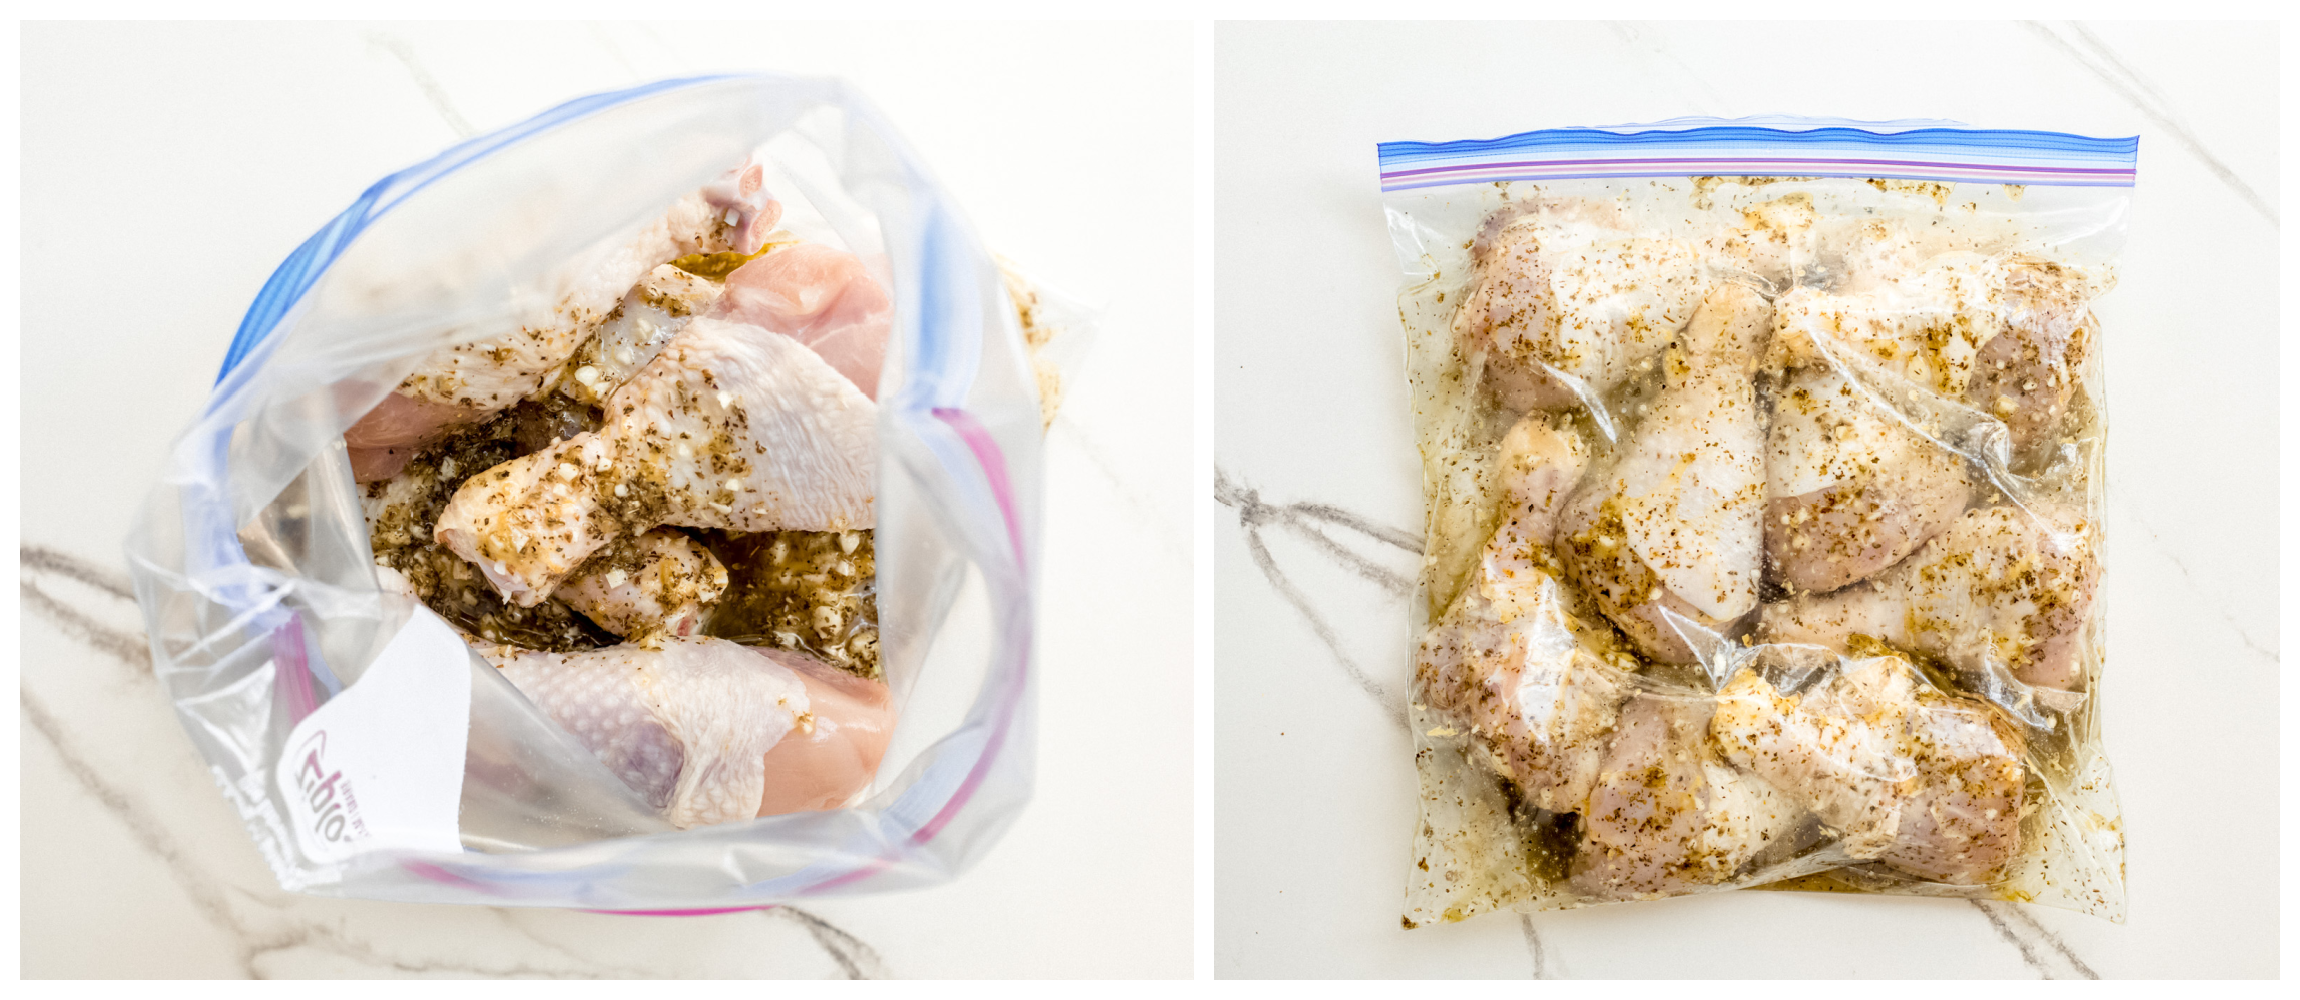 two photos showing chicken legs in ziploc bag in one, and chicken legs with marinade in second.